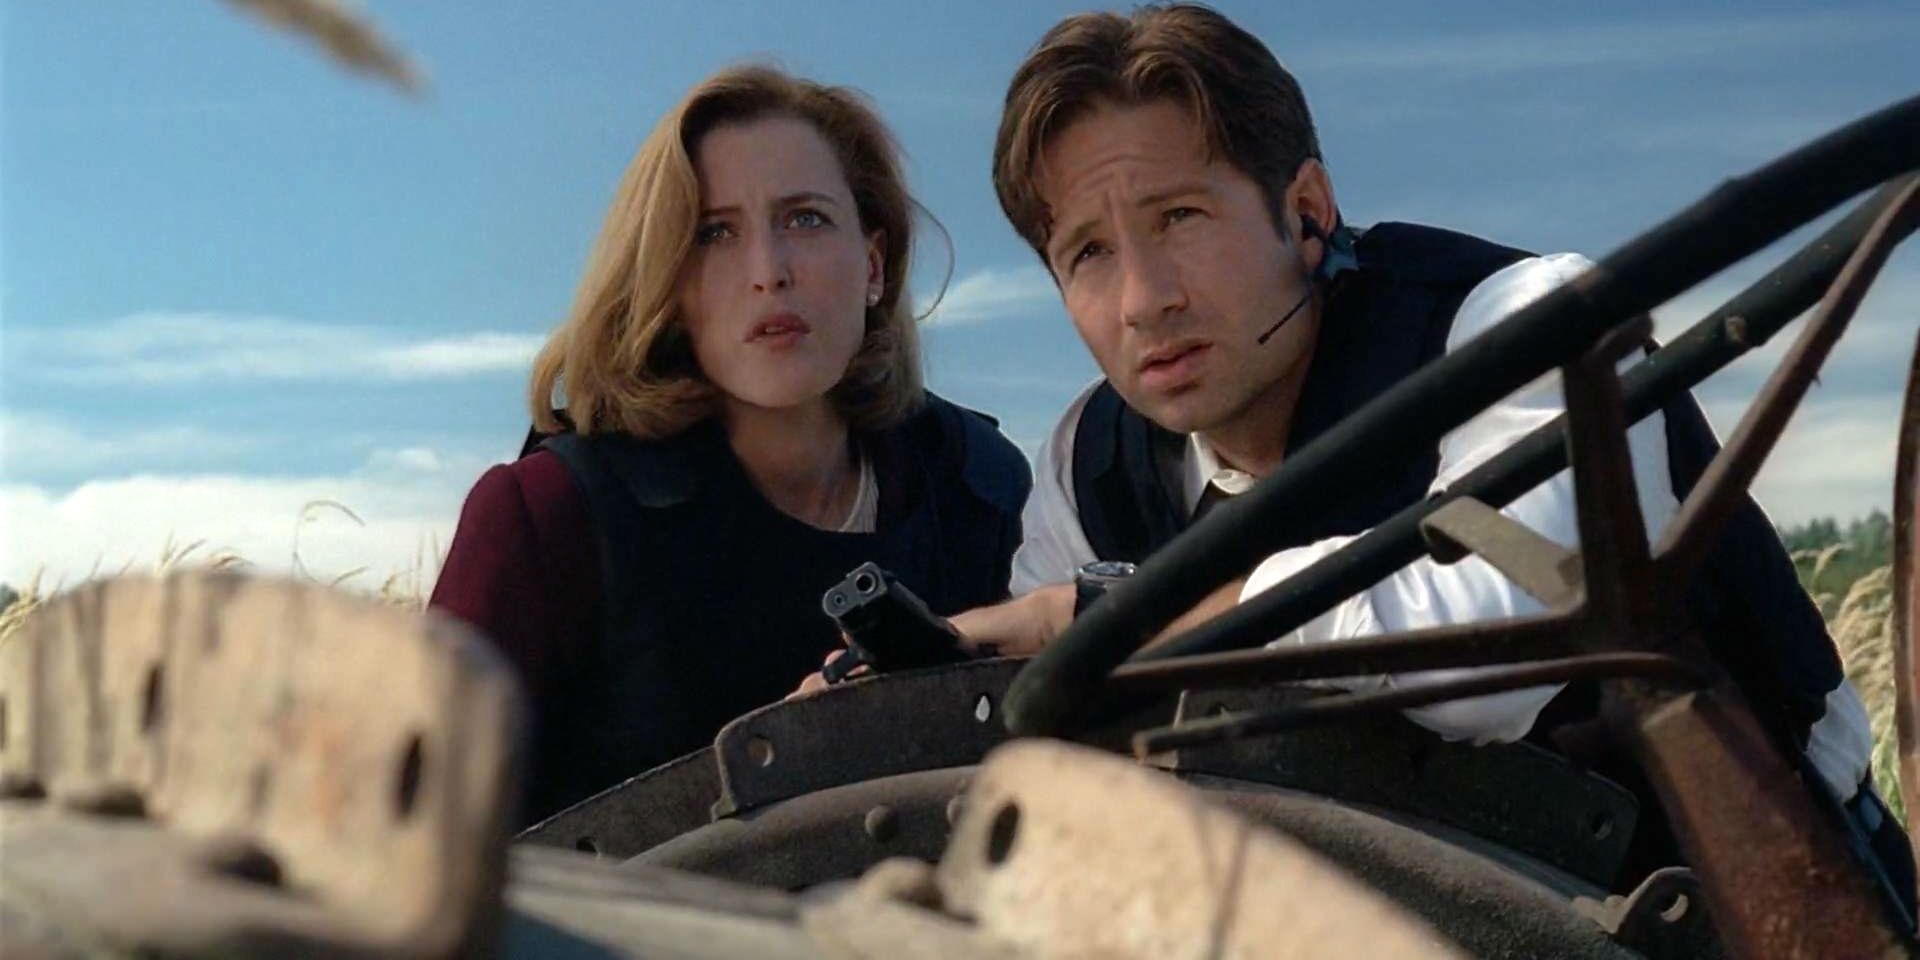 Scully and Mulder in the controversial X-Files episode Home